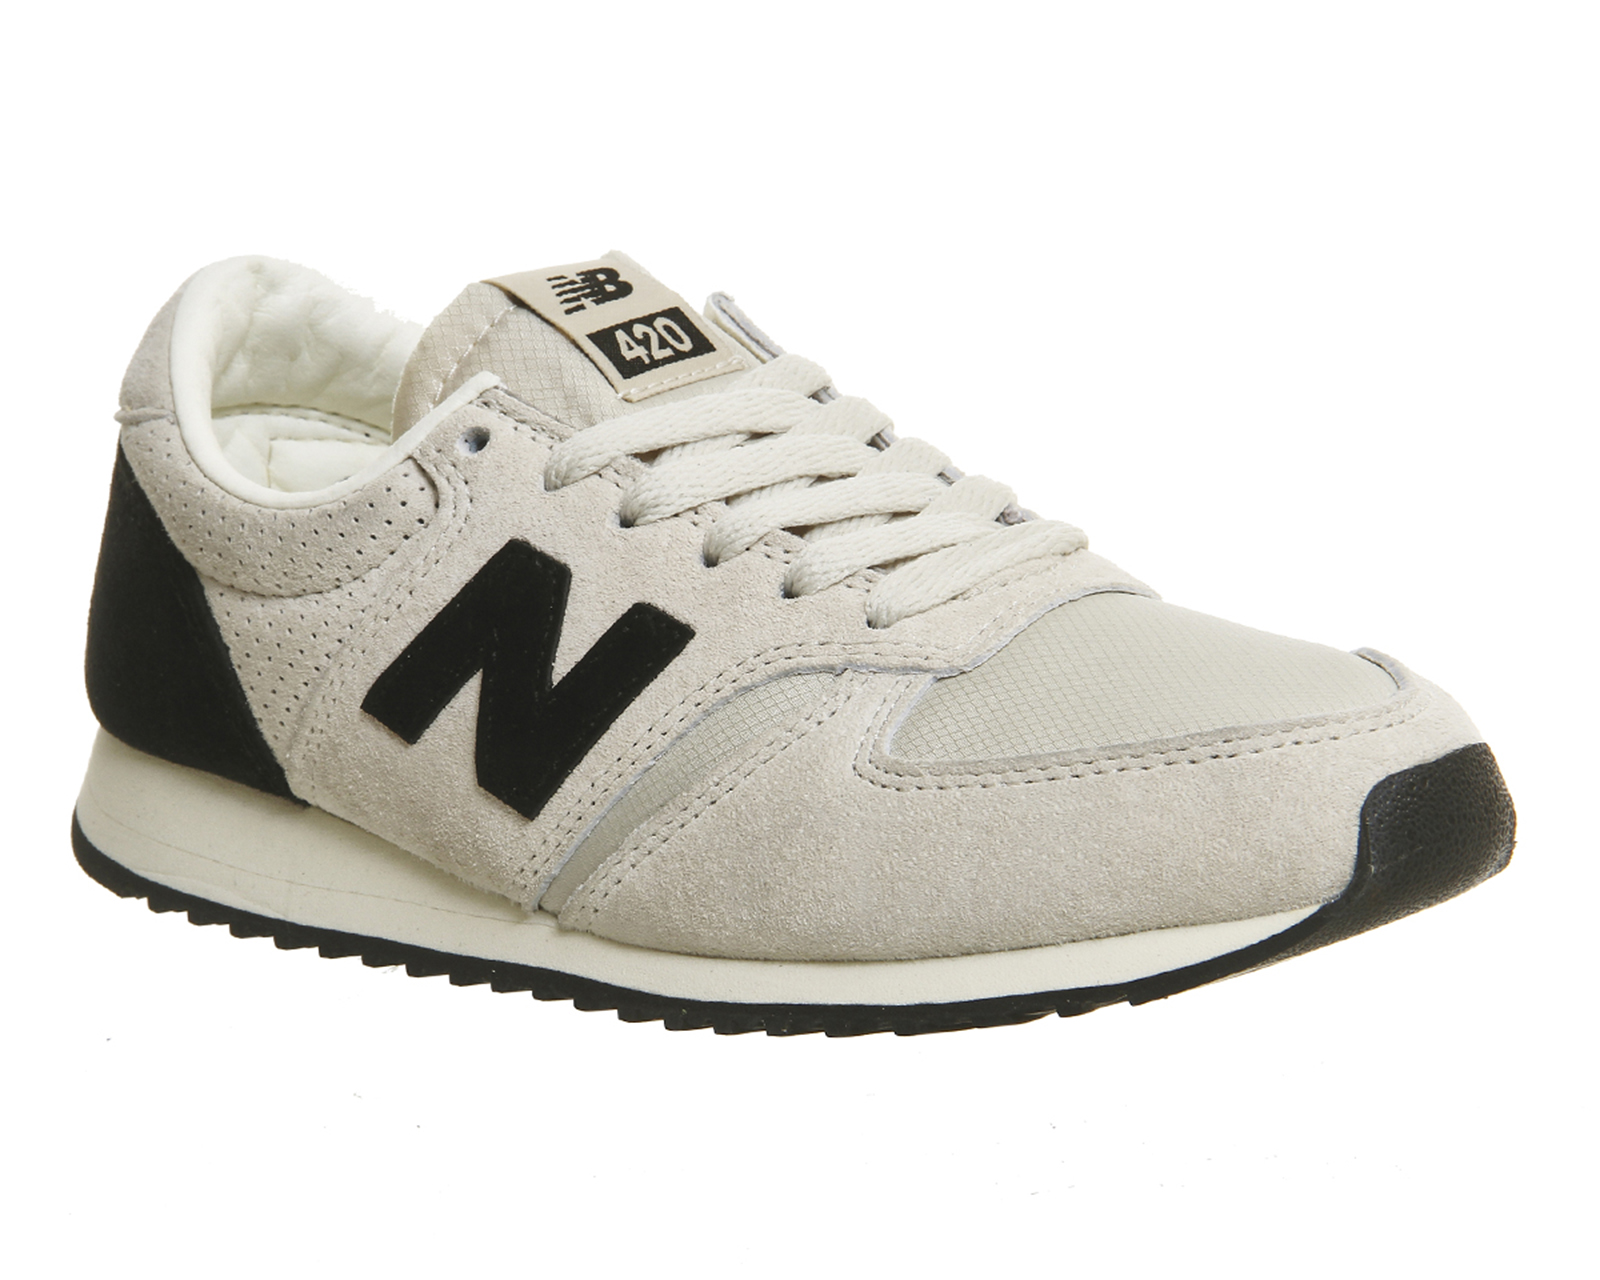 new balance 420 grey and black suede trainers